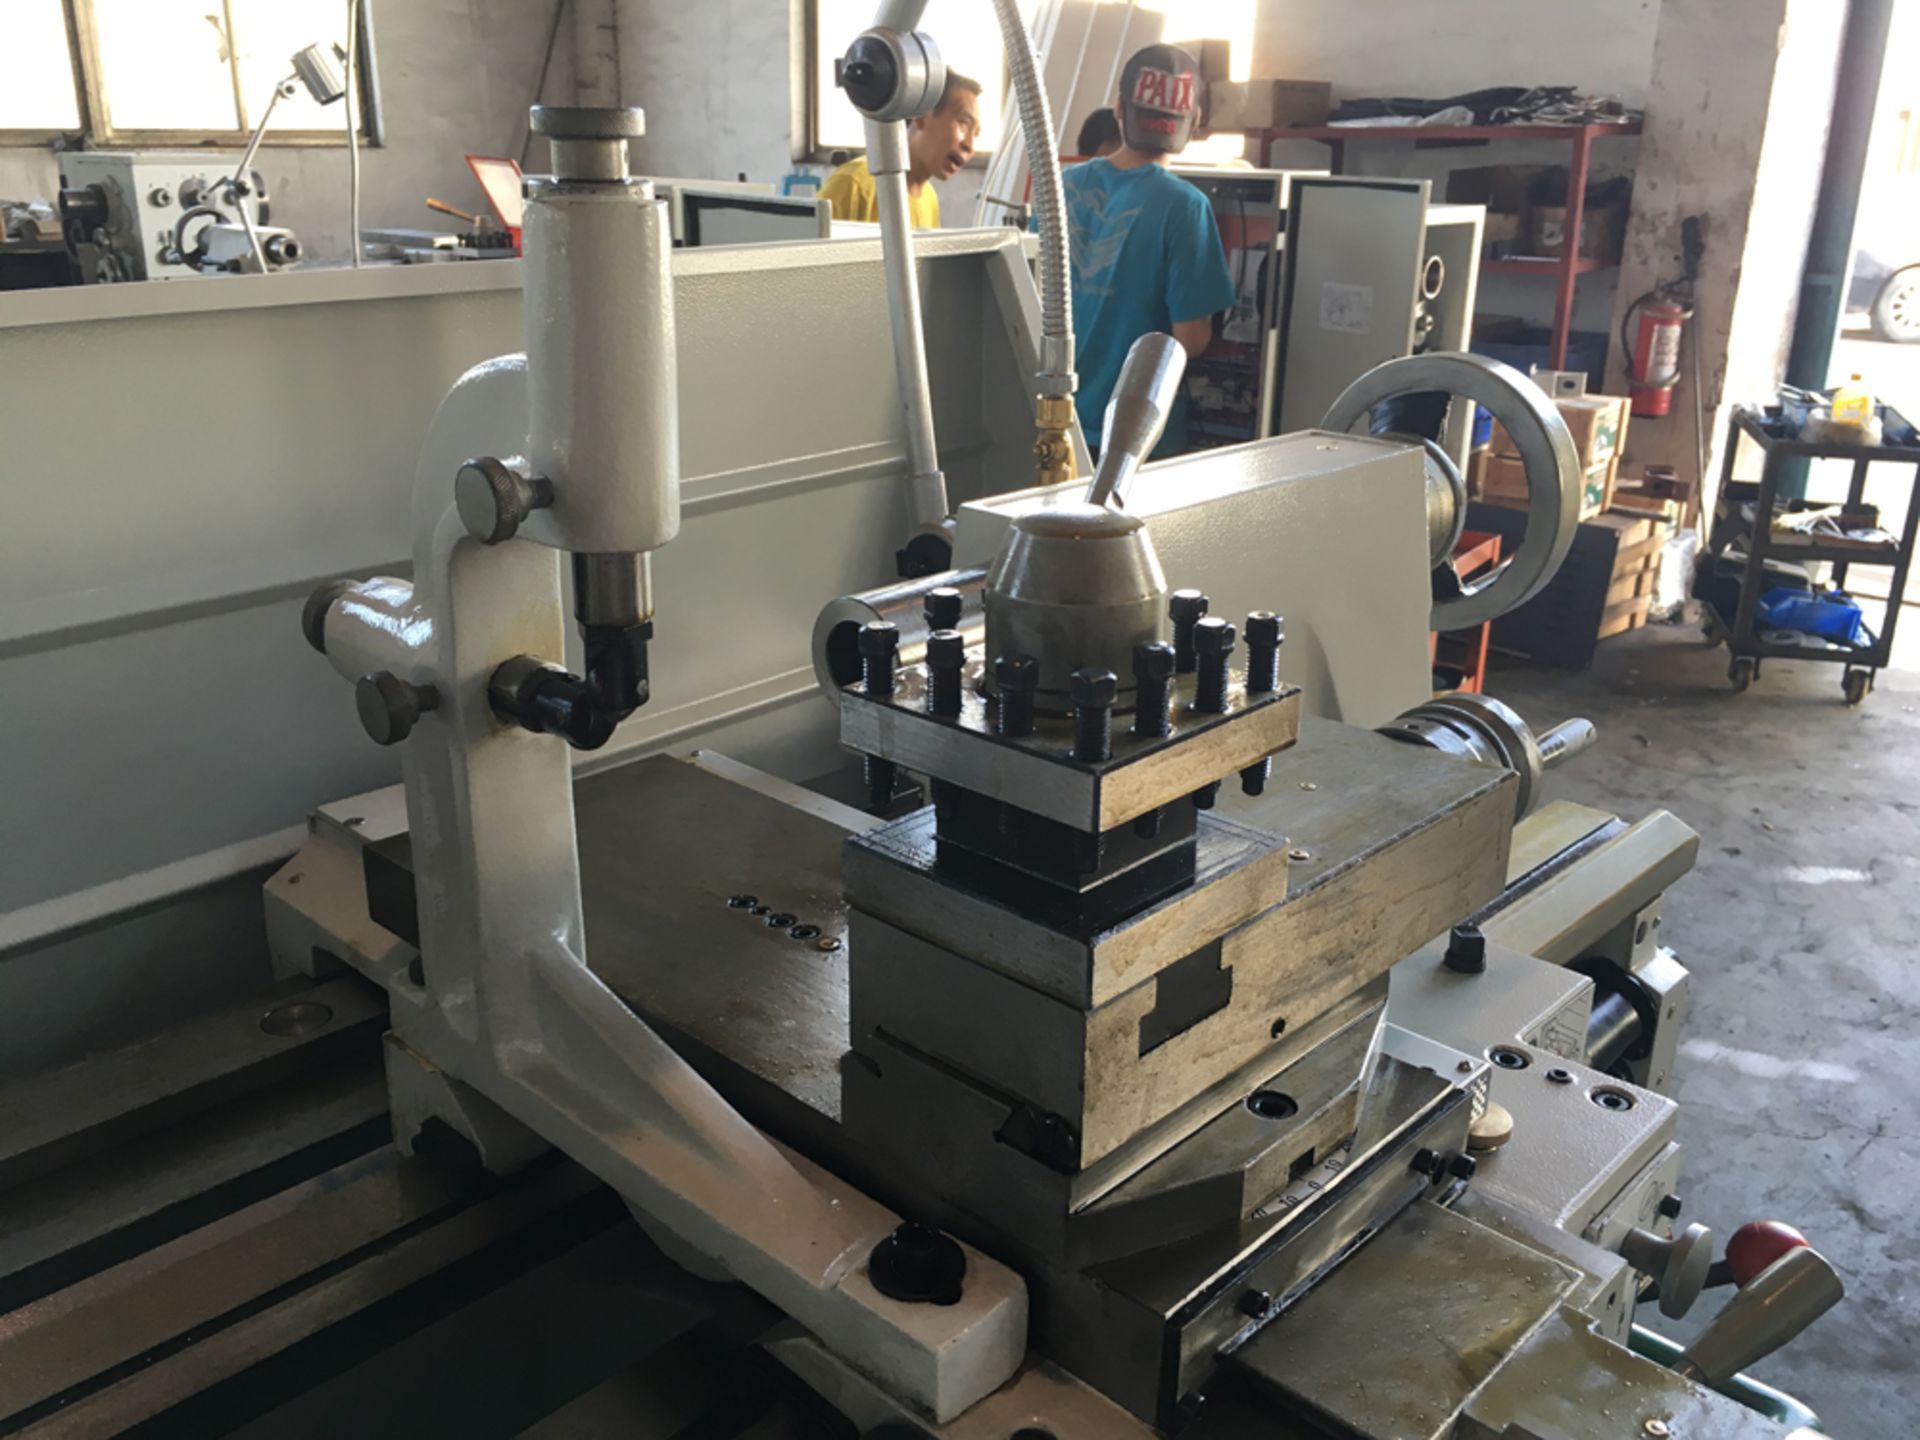 BL1660 Lathe with 16" Swing with 60" Between Centres with DRO (digital readout), tool post, - Image 3 of 4